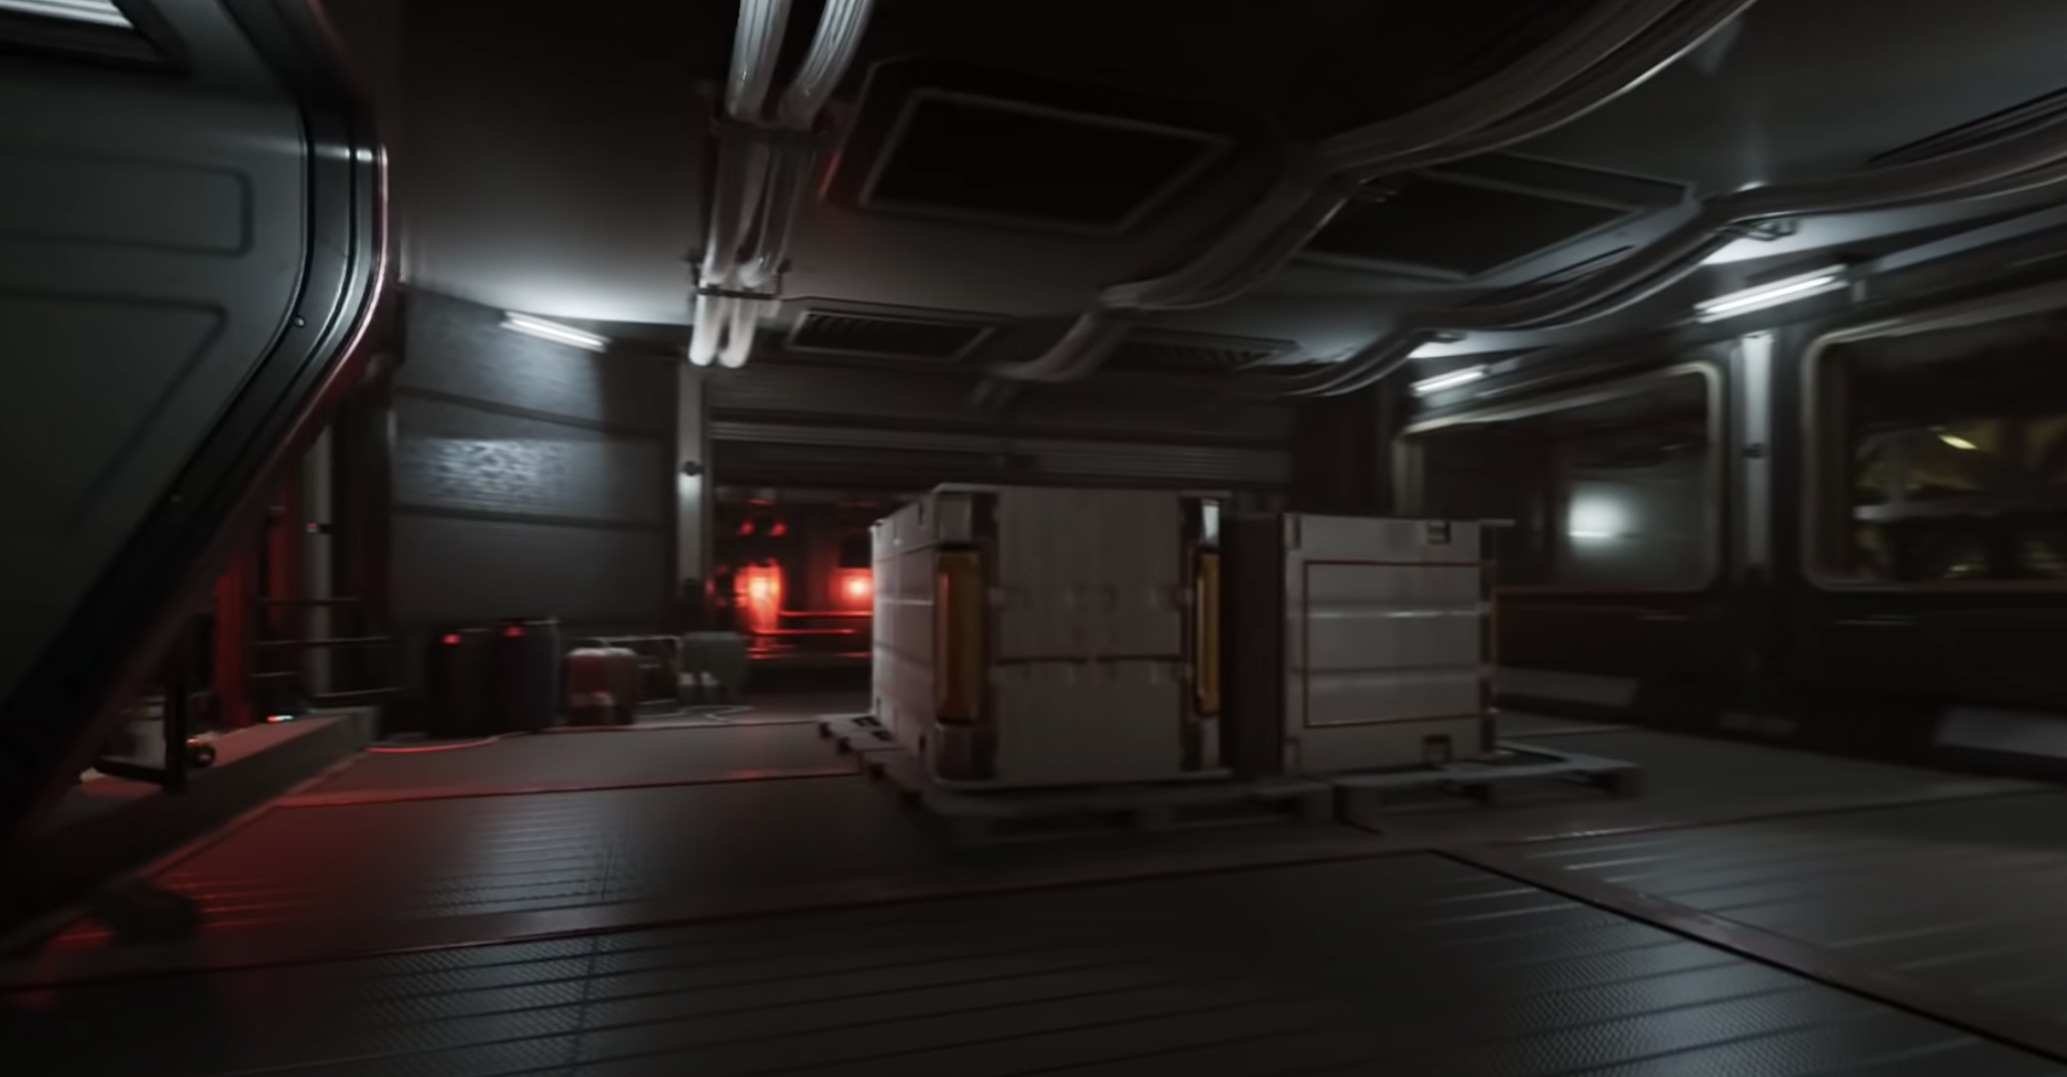 Among Us provides a realistic simulation of imposters on a spaceship on  Make a GIF